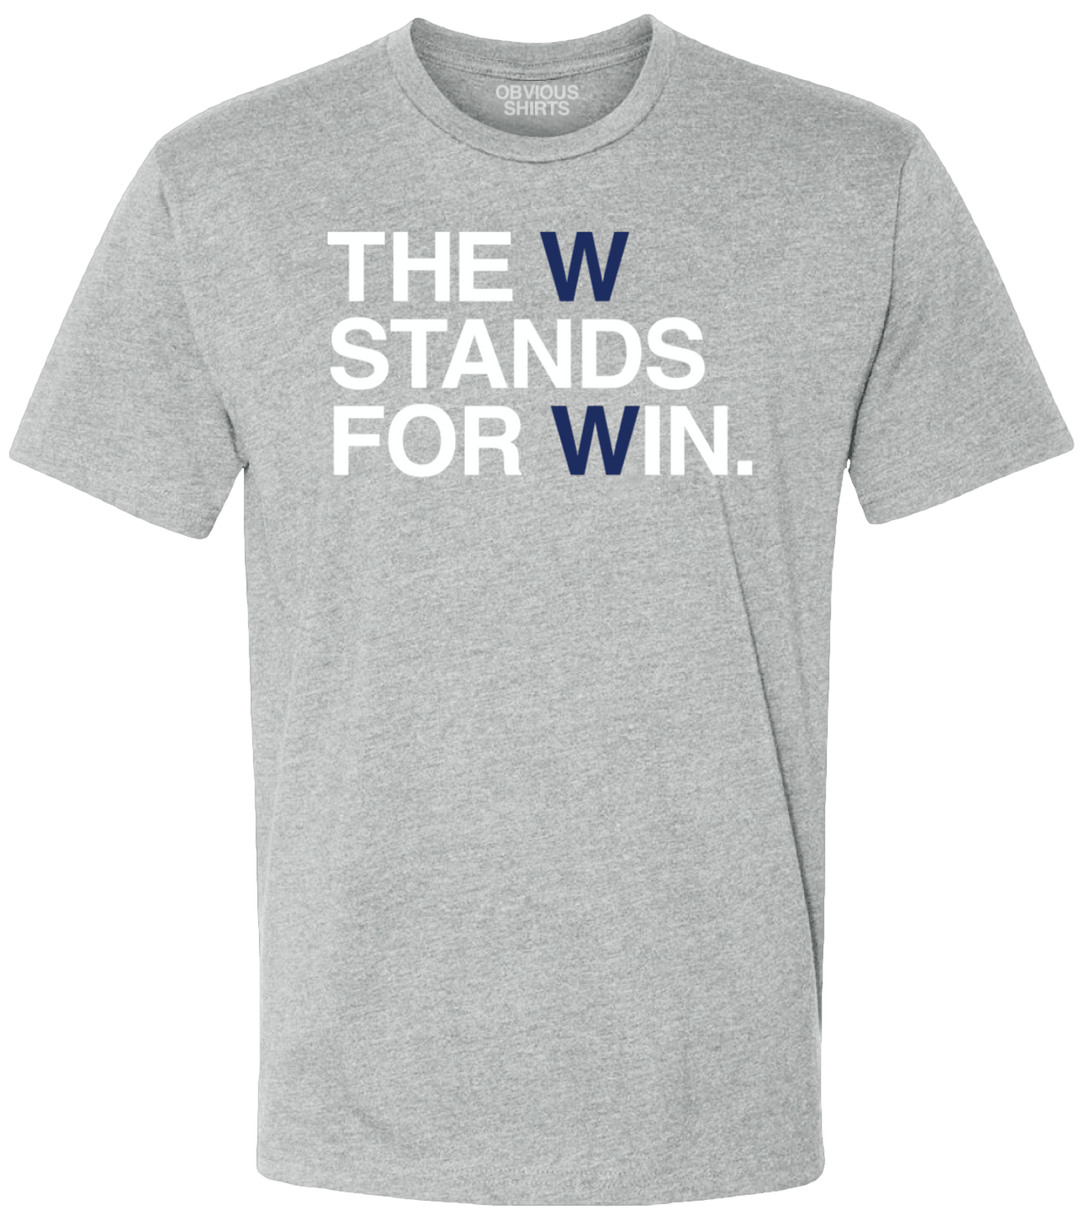 THE W STANDS FOR WIN. - OBVIOUS SHIRTS